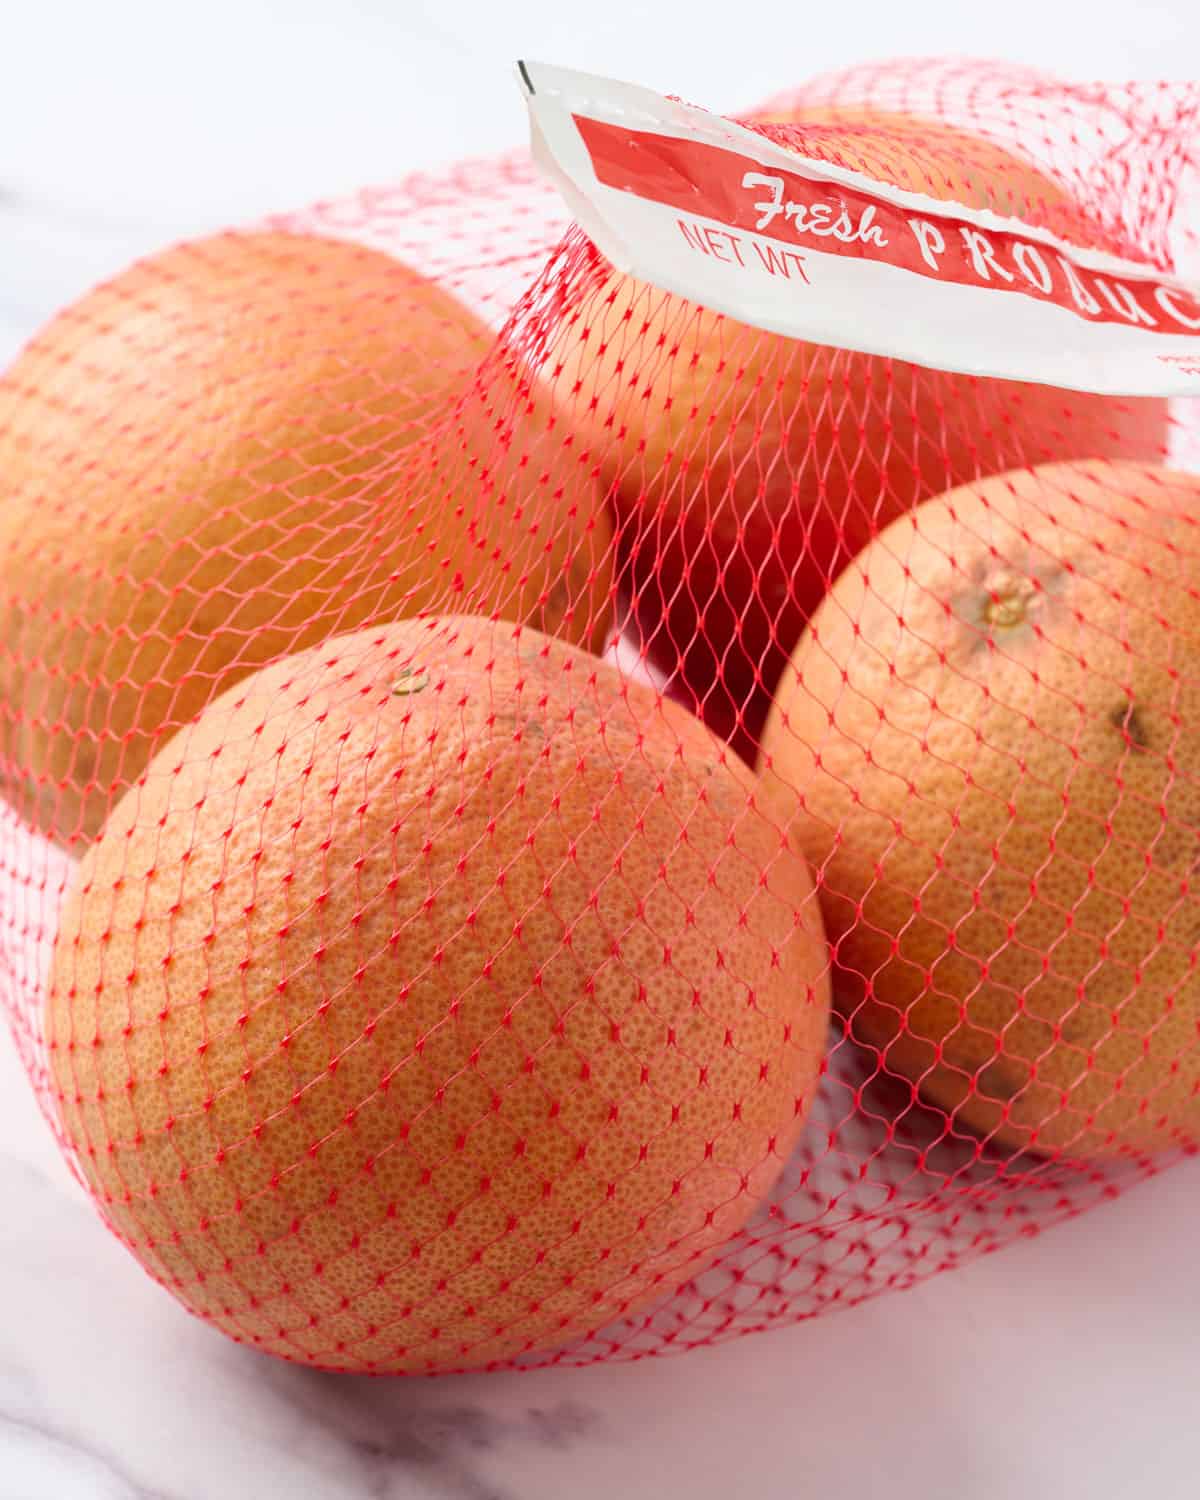 A mesh bag of fresh grapefruit on the couter.